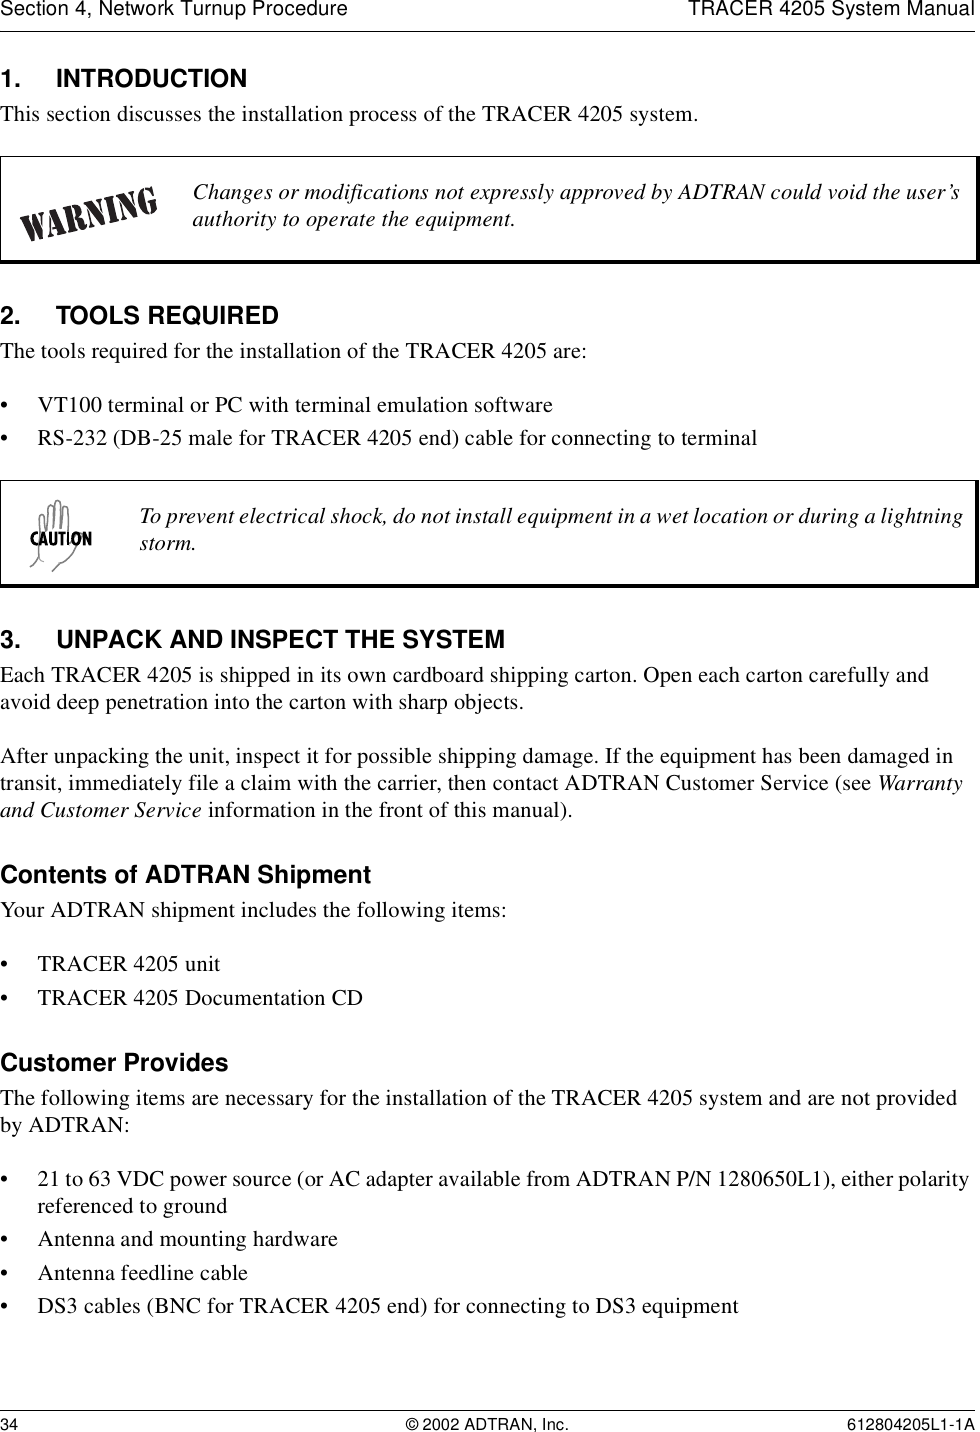 Section 4, Network Turnup Procedure TRACER 4205 System Manual34 © 2002 ADTRAN, Inc. 612804205L1-1A1. INTRODUCTIONThis section discusses the installation process of the TRACER 4205 system.2. TOOLS REQUIREDThe tools required for the installation of the TRACER 4205 are:• VT100 terminal or PC with terminal emulation software• RS-232 (DB-25 male for TRACER 4205 end) cable for connecting to terminal3. UNPACK AND INSPECT THE SYSTEMEach TRACER 4205 is shipped in its own cardboard shipping carton. Open each carton carefully and avoid deep penetration into the carton with sharp objects. After unpacking the unit, inspect it for possible shipping damage. If the equipment has been damaged in transit, immediately file a claim with the carrier, then contact ADTRAN Customer Service (see Warranty and Customer Service information in the front of this manual).Contents of ADTRAN ShipmentYour ADTRAN shipment includes the following items:• TRACER 4205 unit• TRACER 4205 Documentation CDCustomer ProvidesThe following items are necessary for the installation of the TRACER 4205 system and are not provided by ADTRAN:• 21 to 63 VDC power source (or AC adapter available from ADTRAN P/N 1280650L1), either polarity referenced to ground• Antenna and mounting hardware• Antenna feedline cable• DS3 cables (BNC for TRACER 4205 end) for connecting to DS3 equipmentChanges or modifications not expressly approved by ADTRAN could void the user’s authority to operate the equipment.To prevent electrical shock, do not install equipment in a wet location or during a lightning storm.